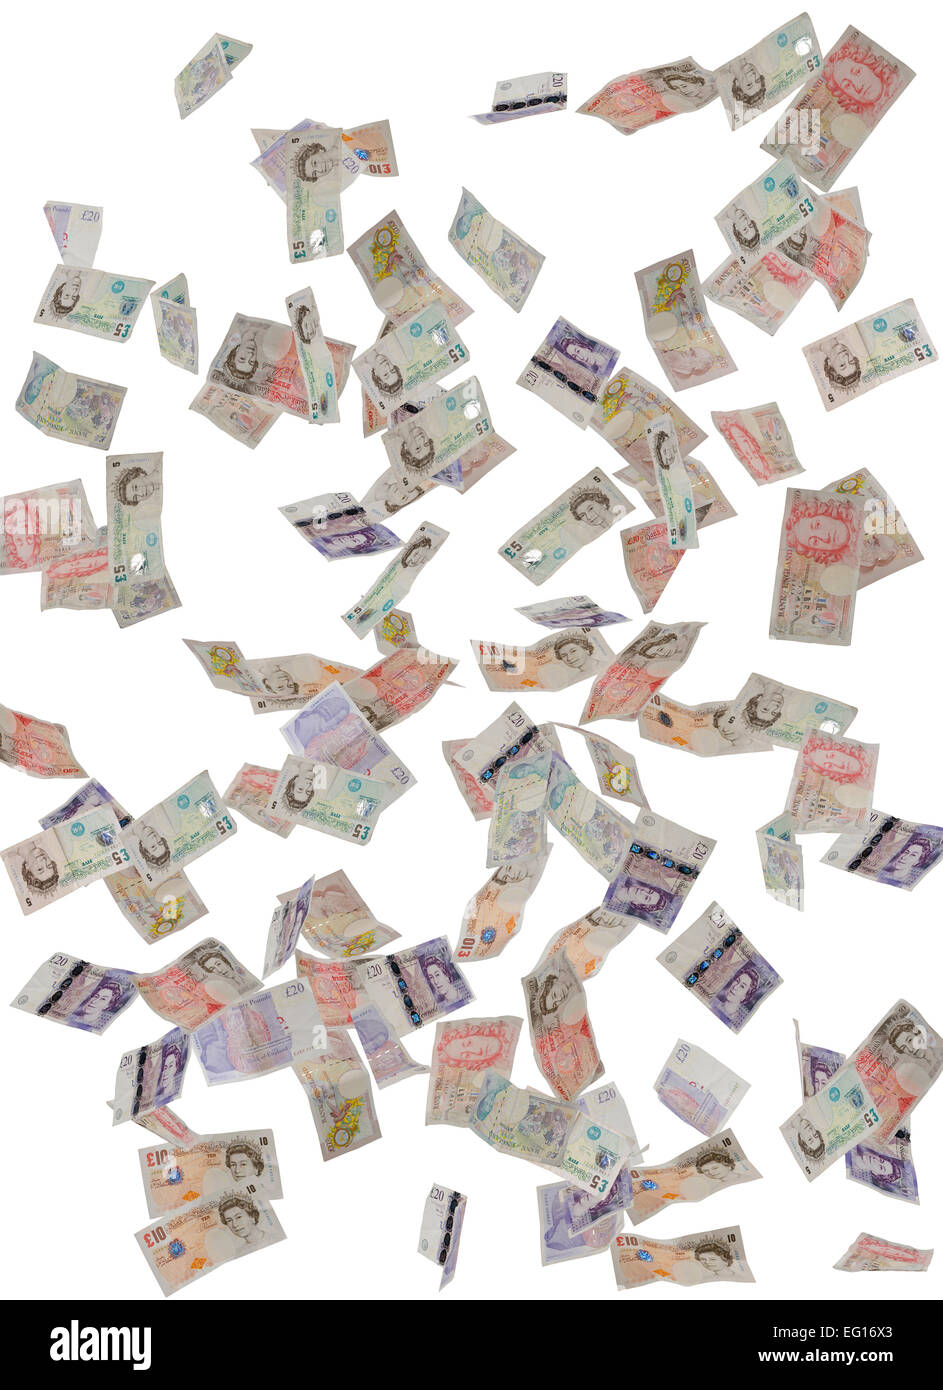 Concept image of British bank notes falling Stock Photo